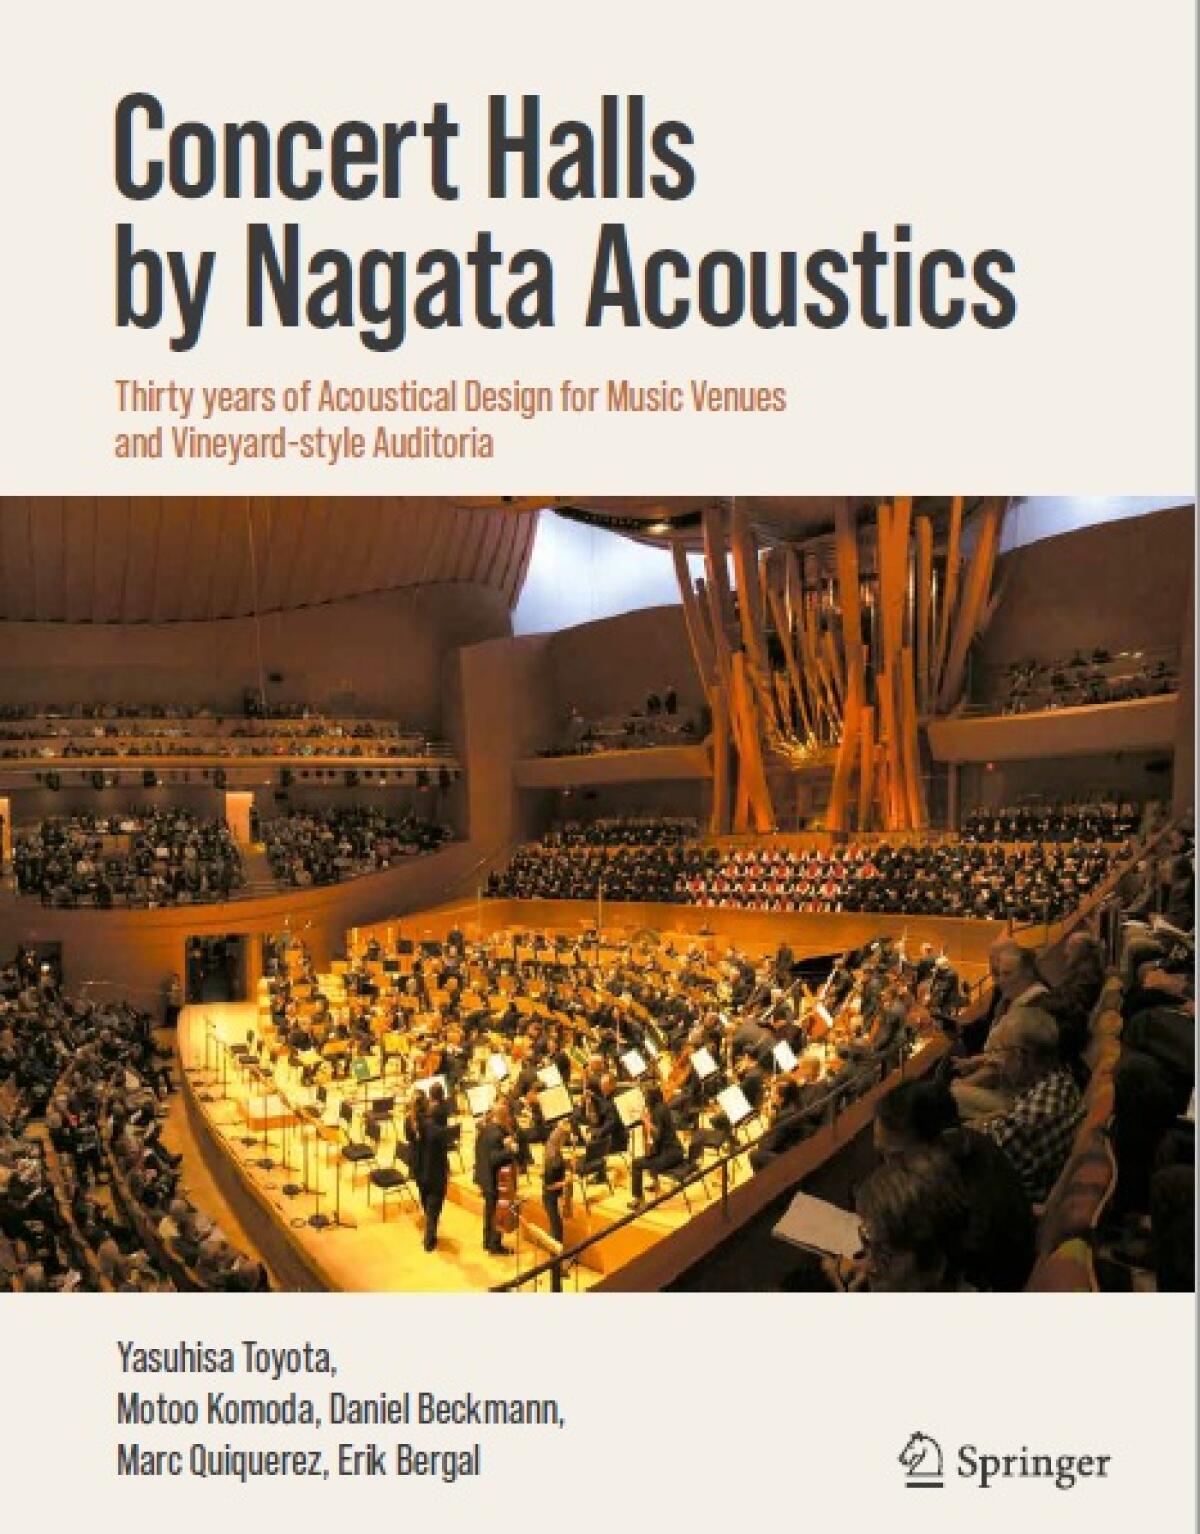 "Concert Halls by Nagata Acoustics" is due out in early 2021.